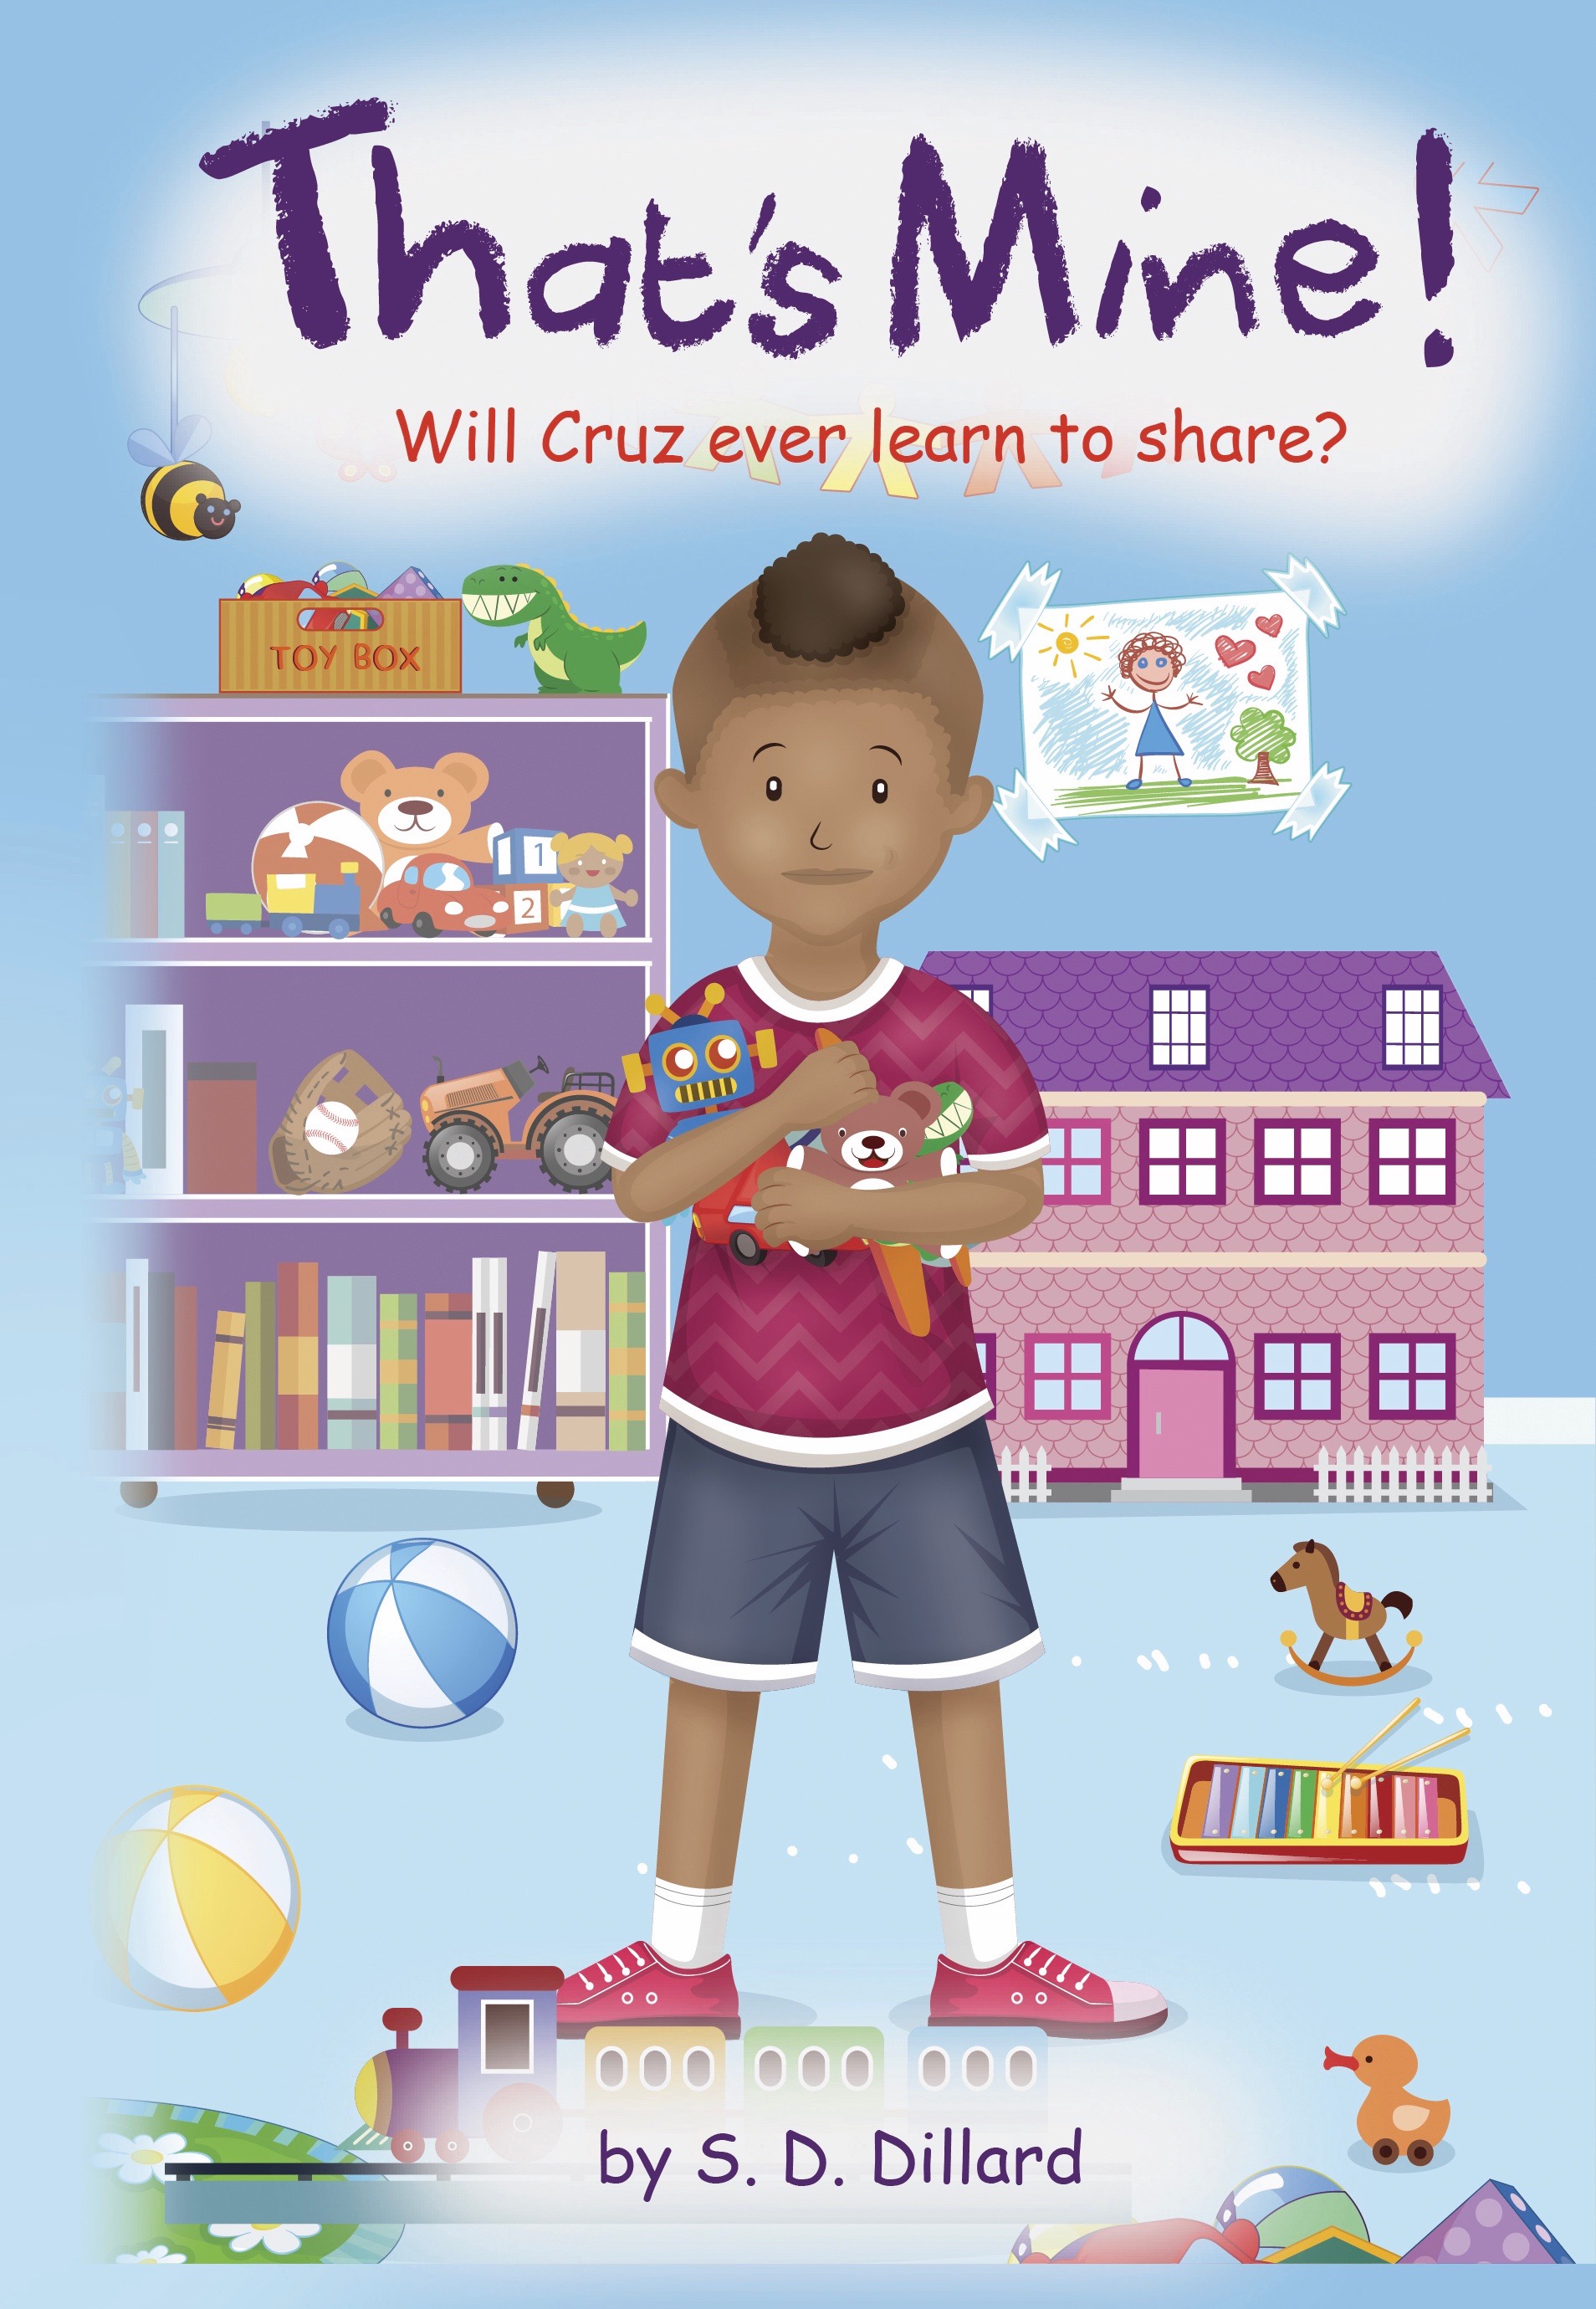 FREE: That’s Mine! Will Cruz ever learn to share! by S. D. Dillard